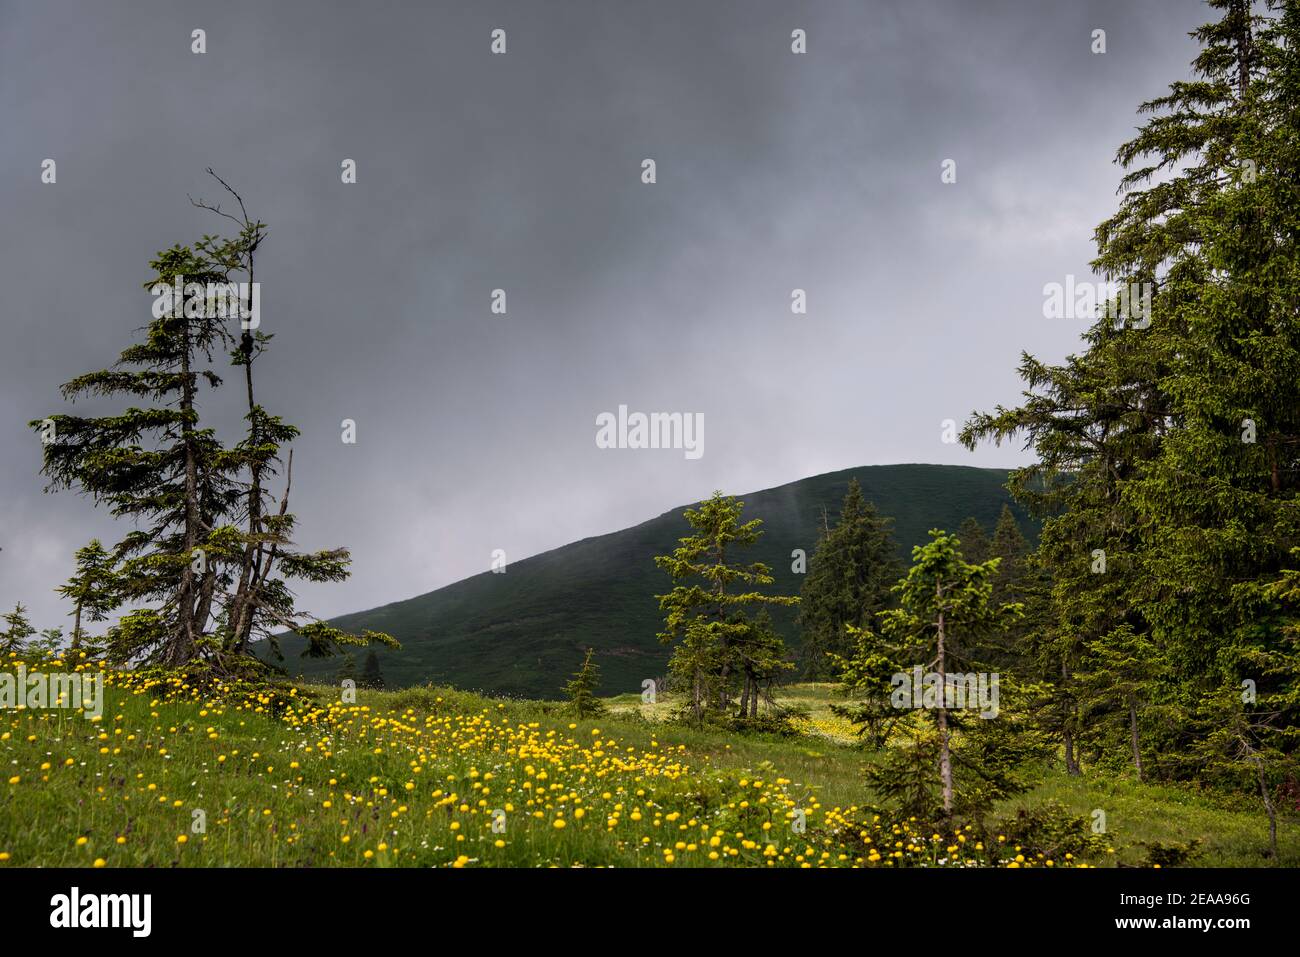 Mountain meadow with globe flowers and fir trees Stock Photo